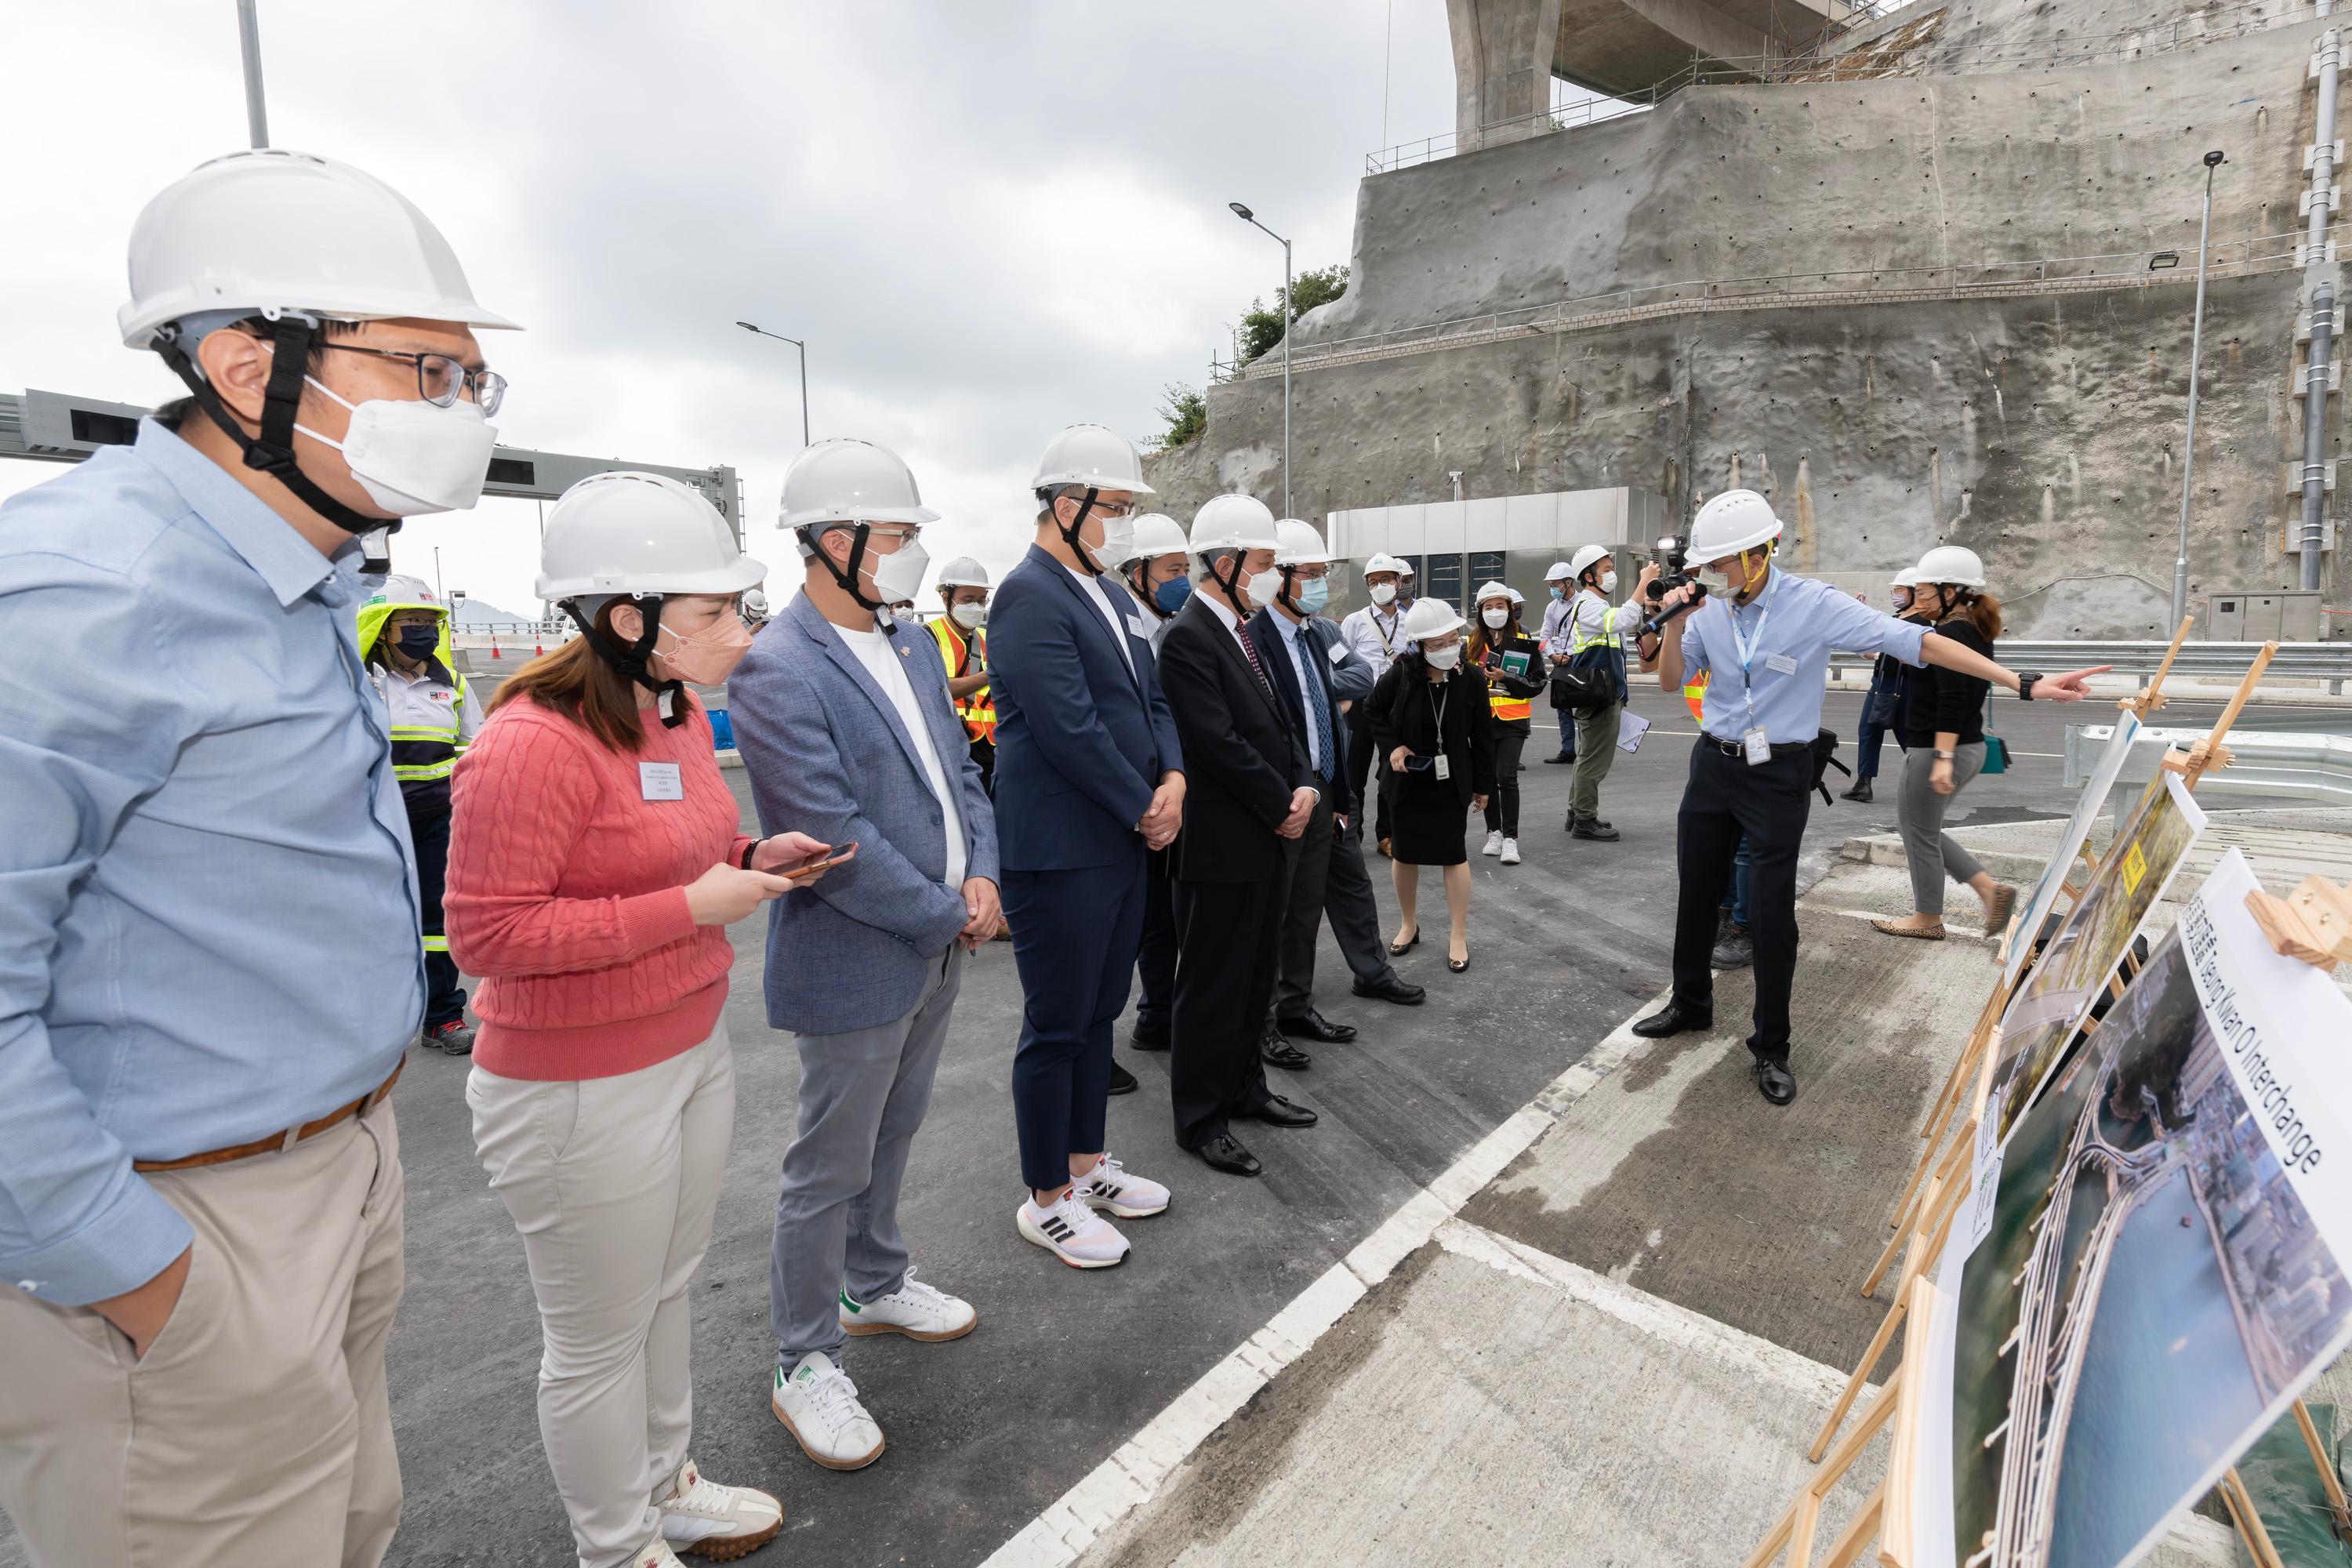 The Legislative Council (LegCo) Panel on Transport today (November 15) visited the Tseung Kwan O-Lam Tin Tunnel (TKO-LT Tunnel) and Cross Bay Link, Tseung Kwan O. Photo shows LegCo Members visiting the TKO-LT Tunnel to learn about the latest situation of the project before its commissioning.